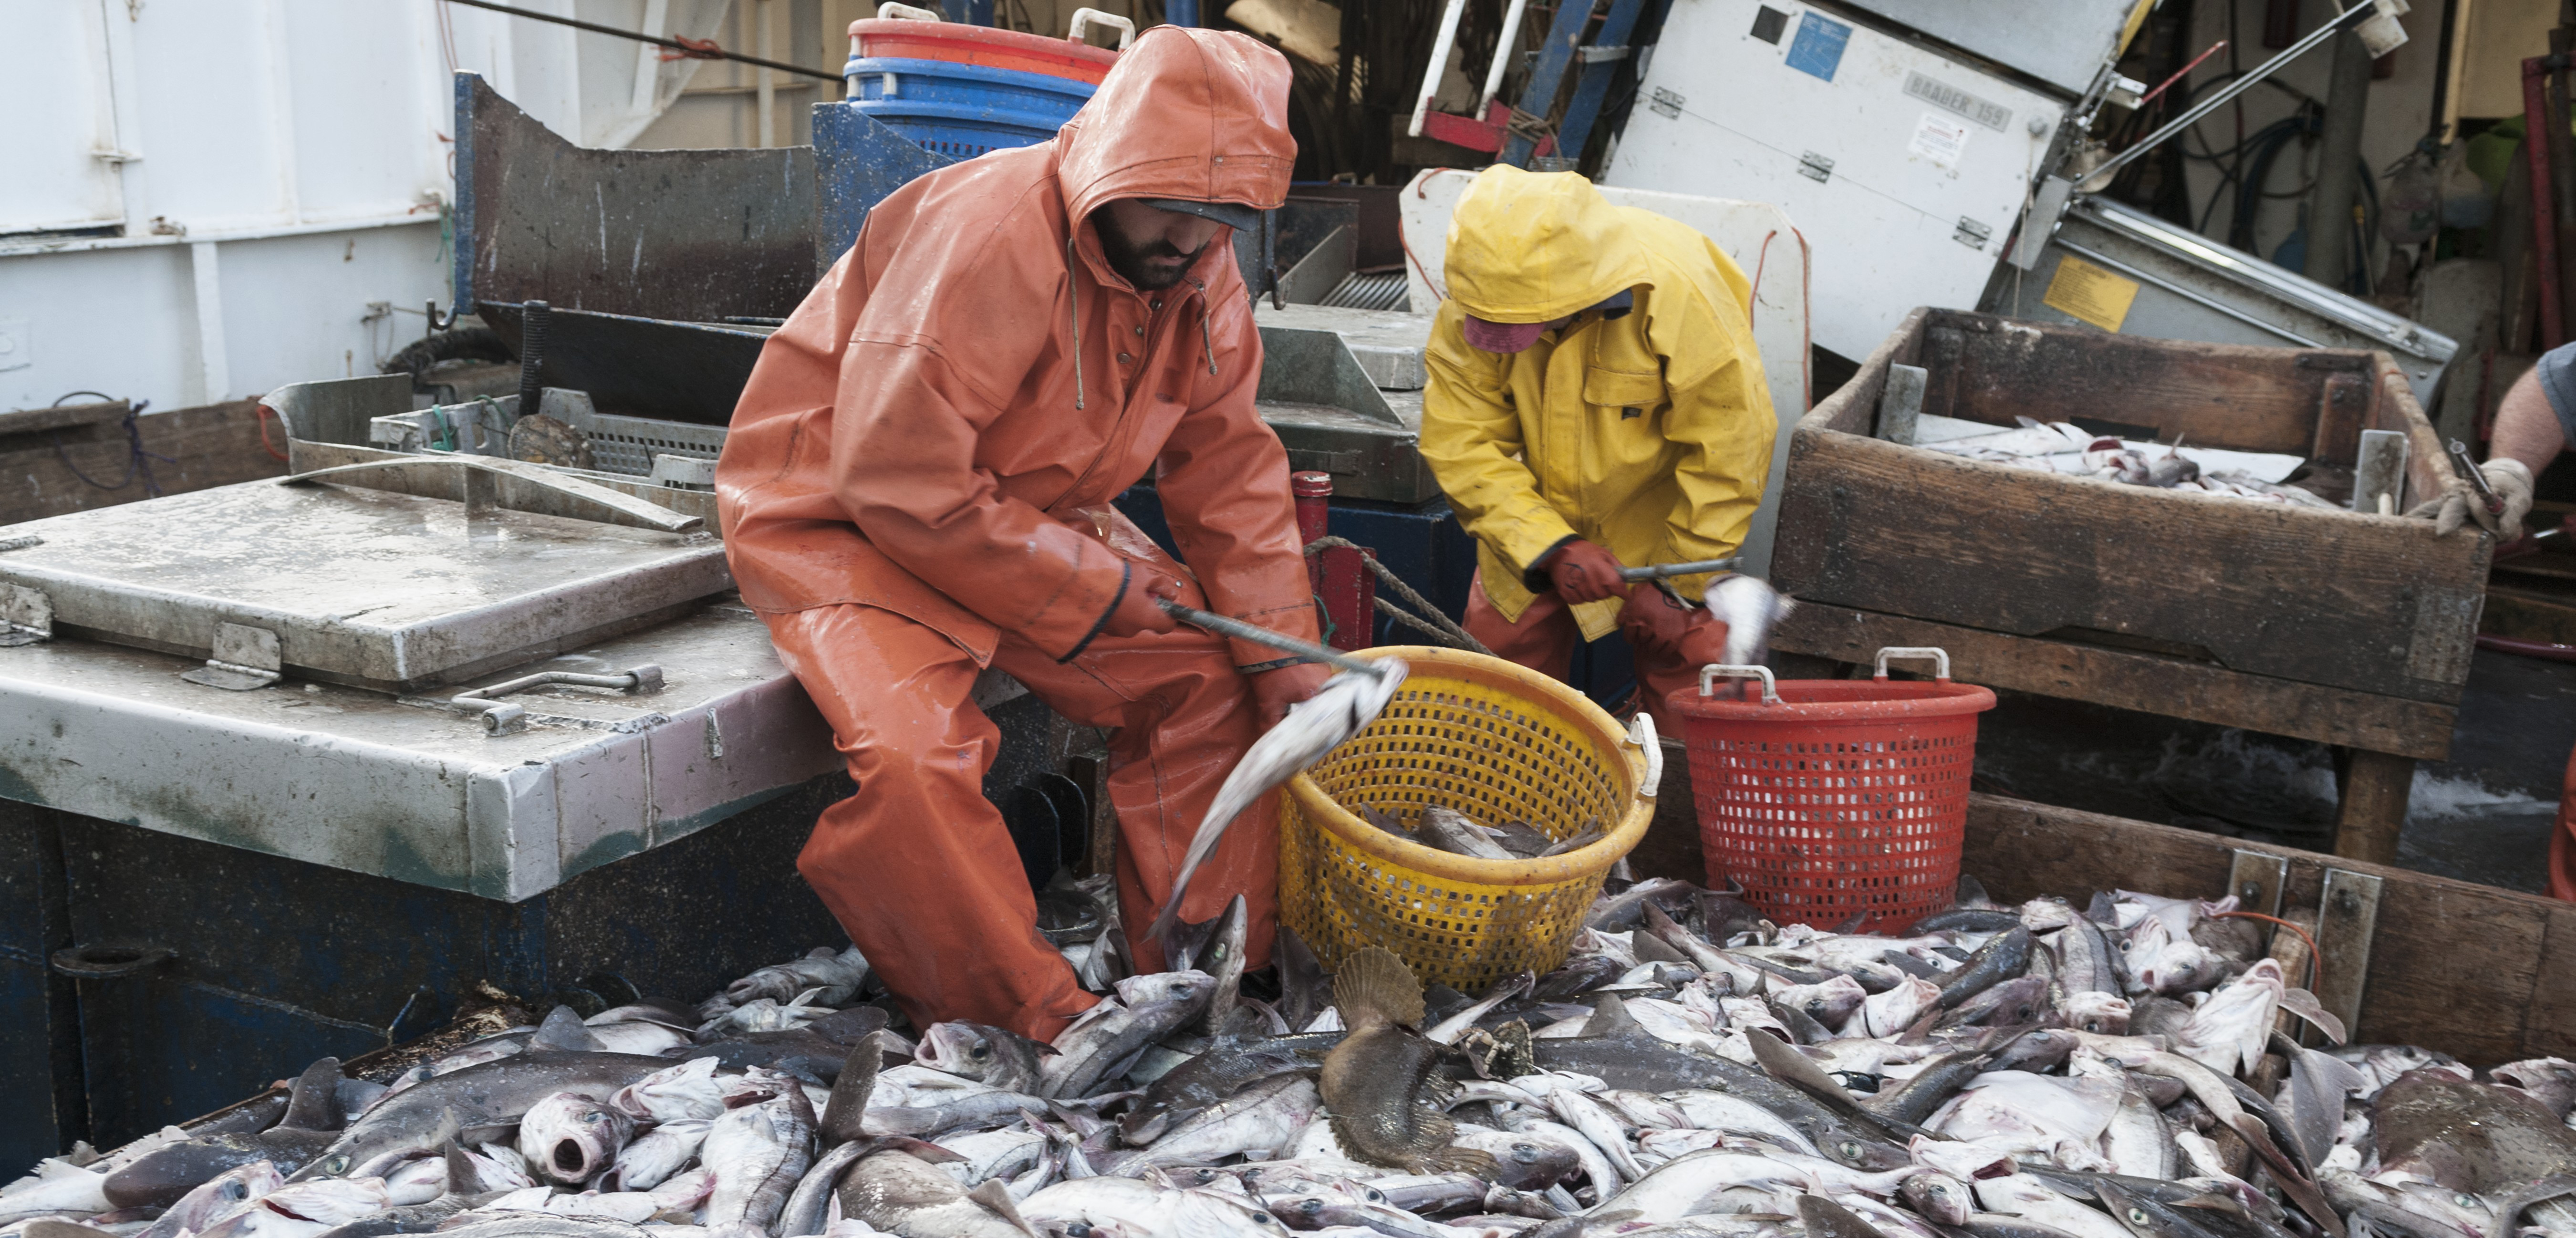 For many species, changing environmental conditions trump overfishing as the top factor affecting fish recruitment. Photo by Rotman/Jeff Rotman Photography/Corbis